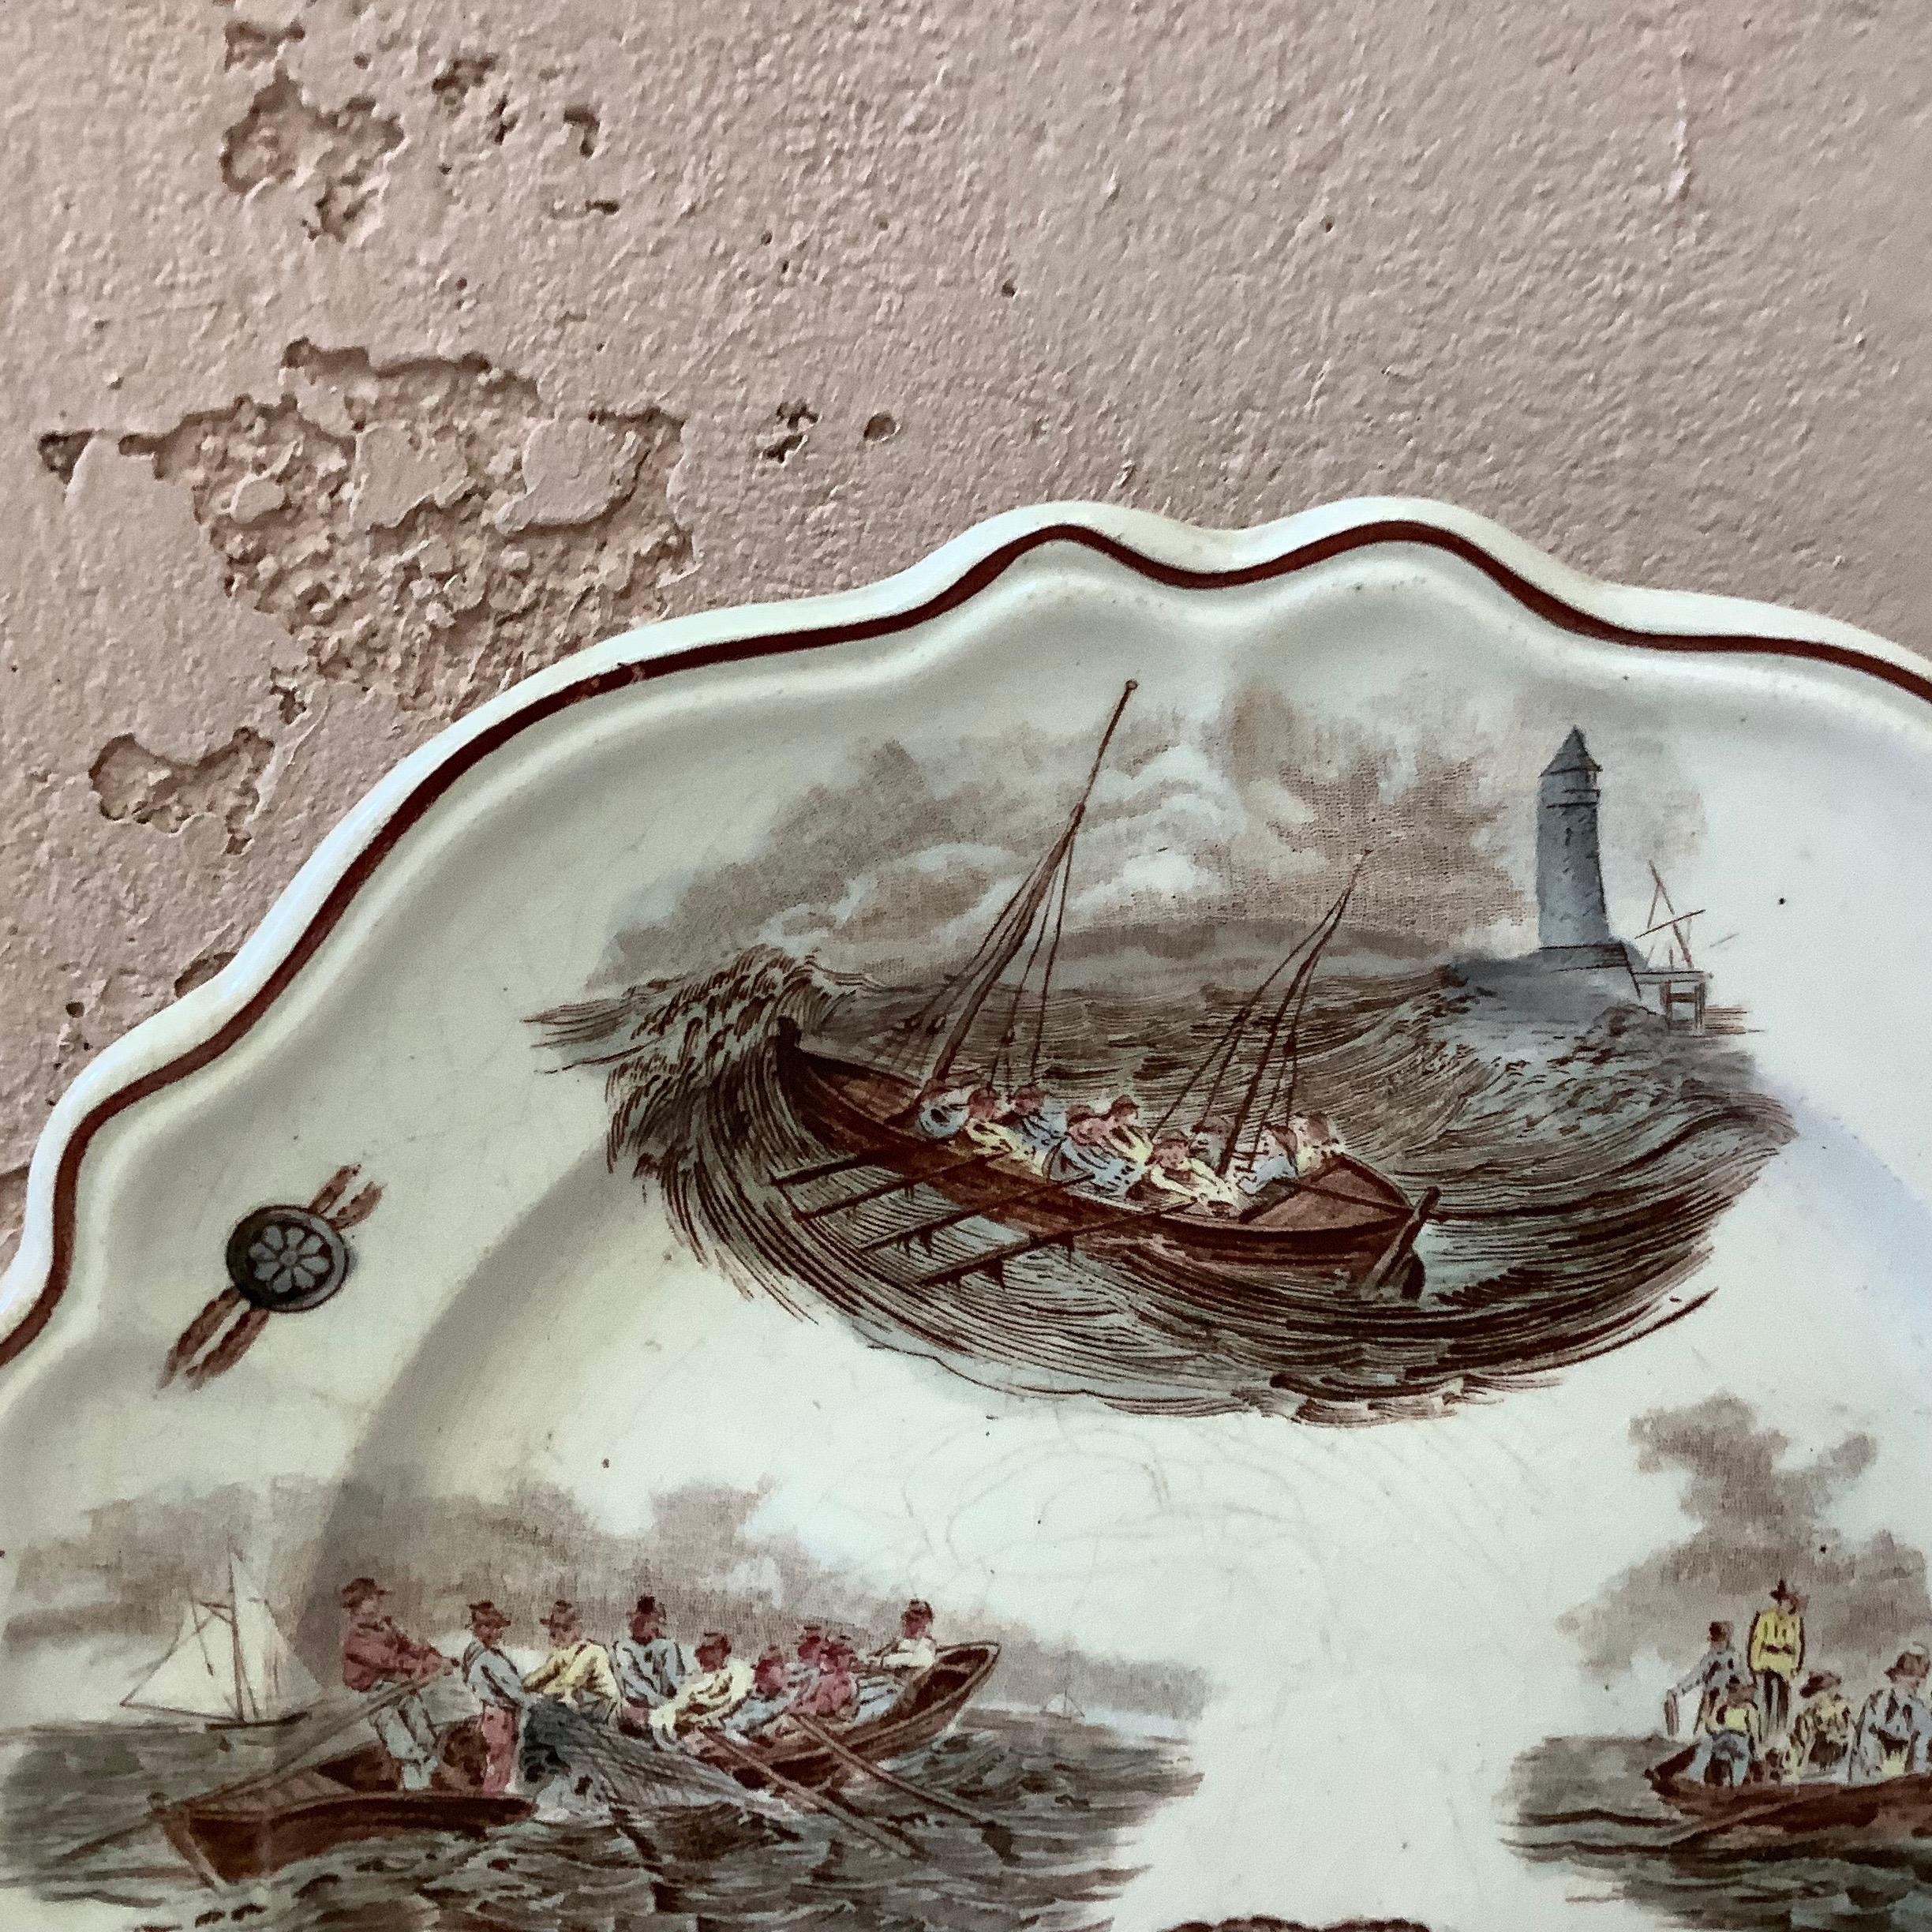 Large 19th French decorative plate with nautical pattern (boats, fishs baskets, lighthouse), circa 1900.